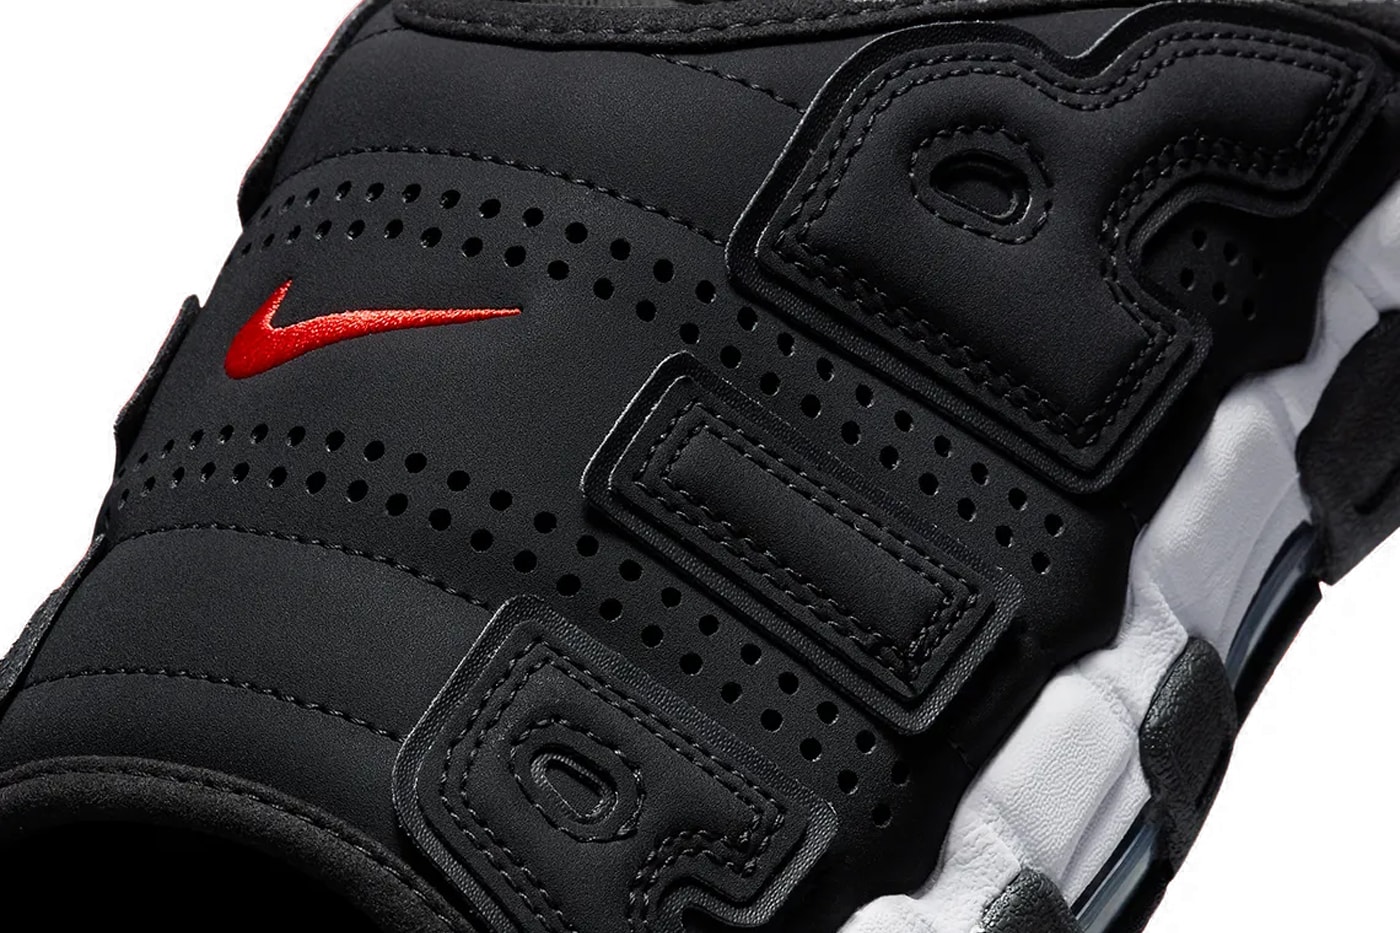 Nike Air More Uptempo Slide Arrives in Blacked-Out Lettering FJ2708-001 Release Info sandals pool beach